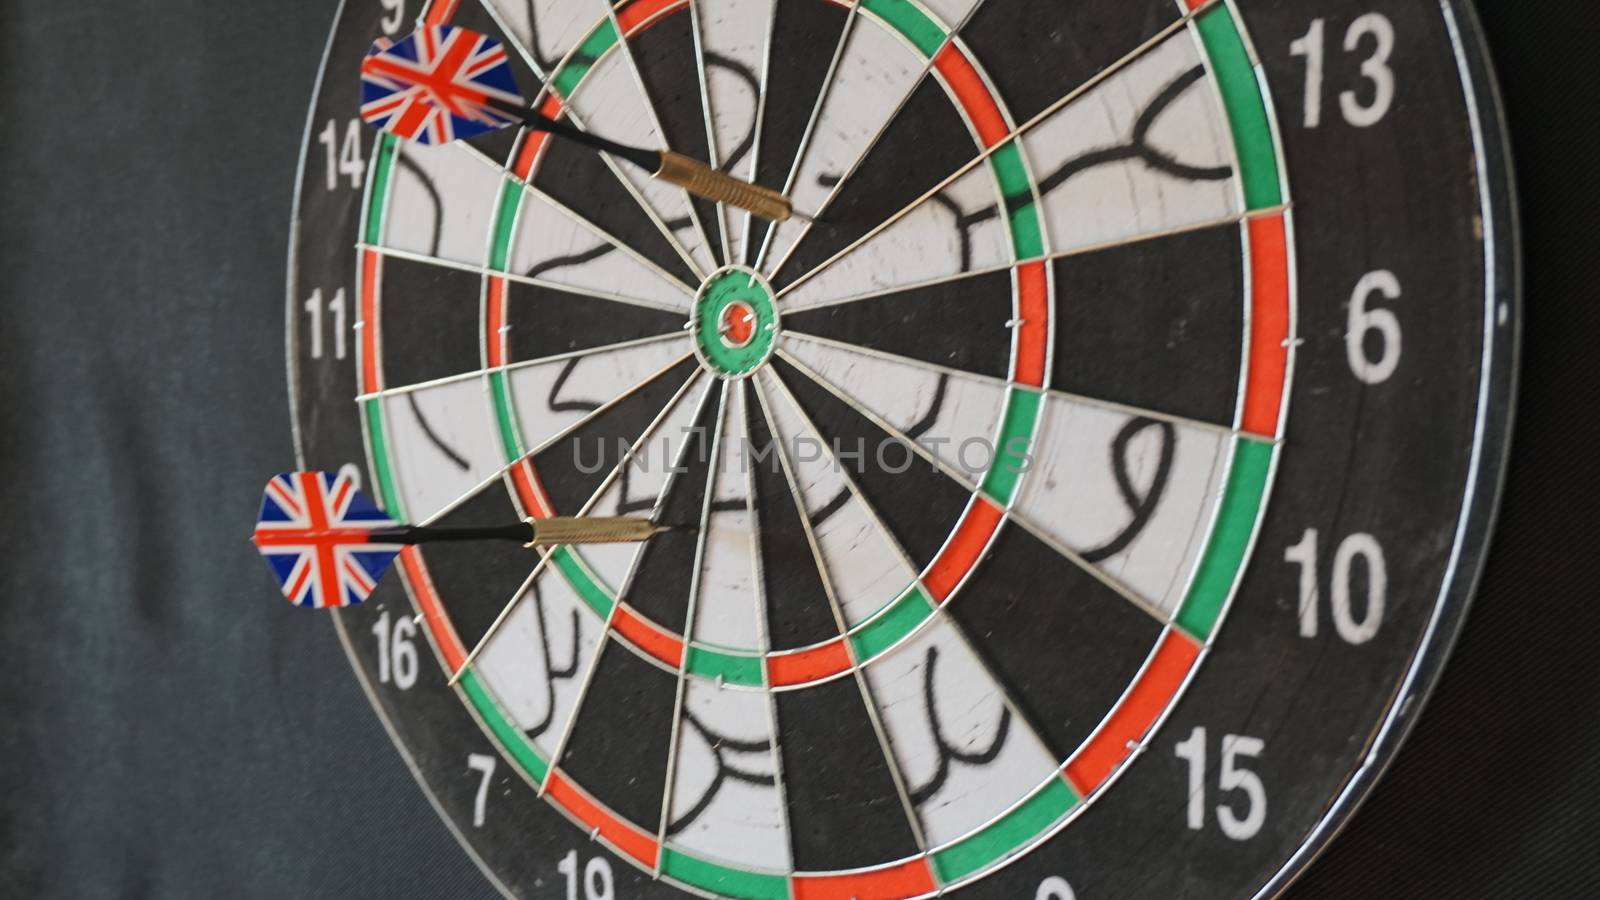 Business concept of darts. The target hanged on the wall.